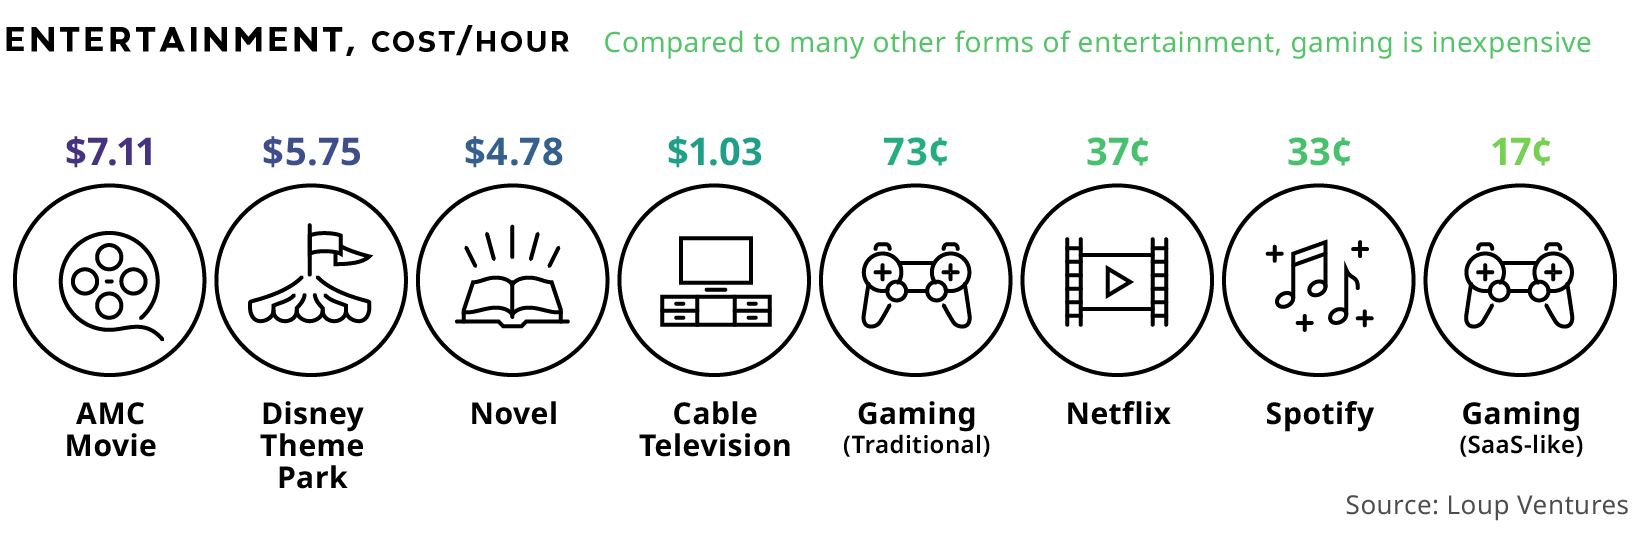 cost of gaming compared to other entertainment